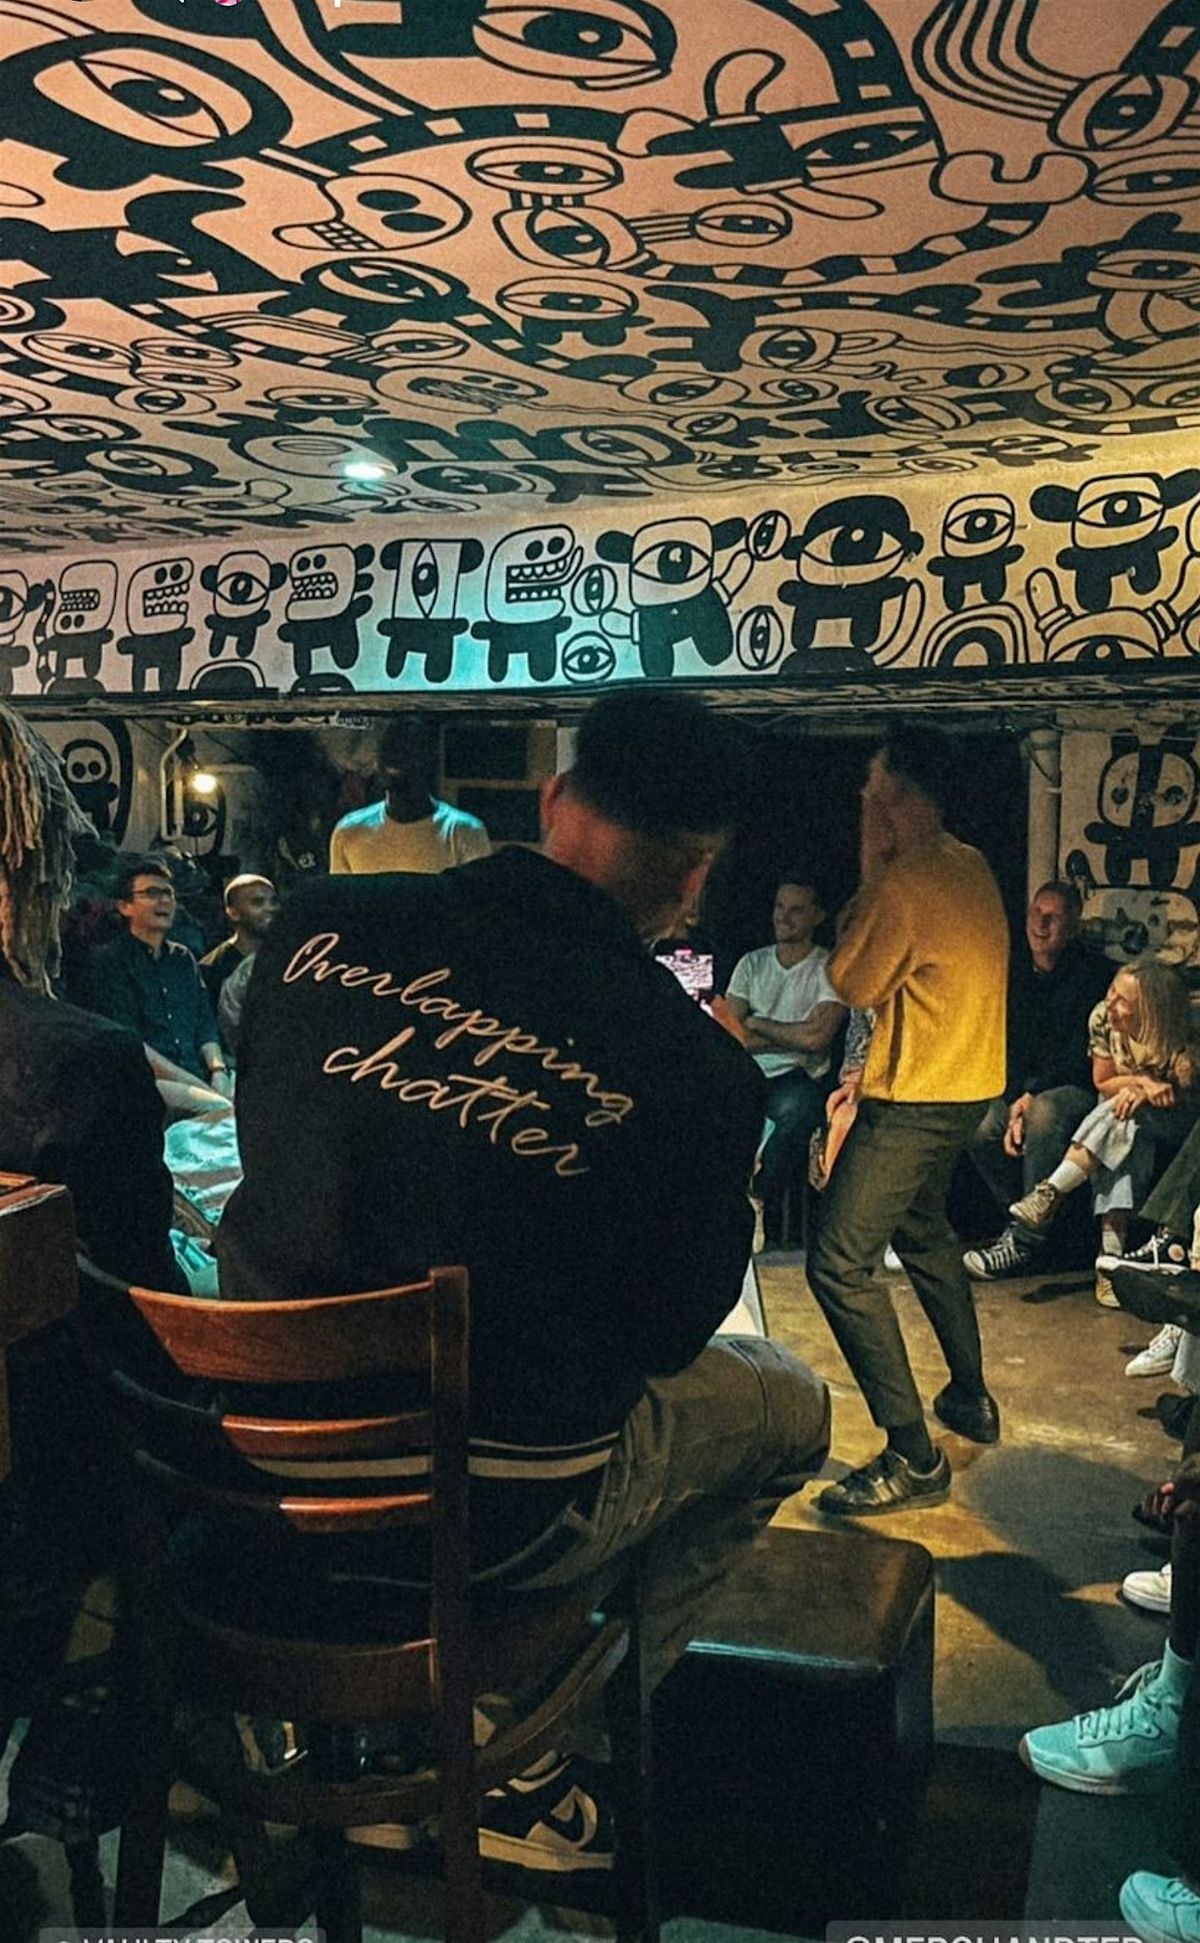 Merch & Ted present: The Improvised Rap Story